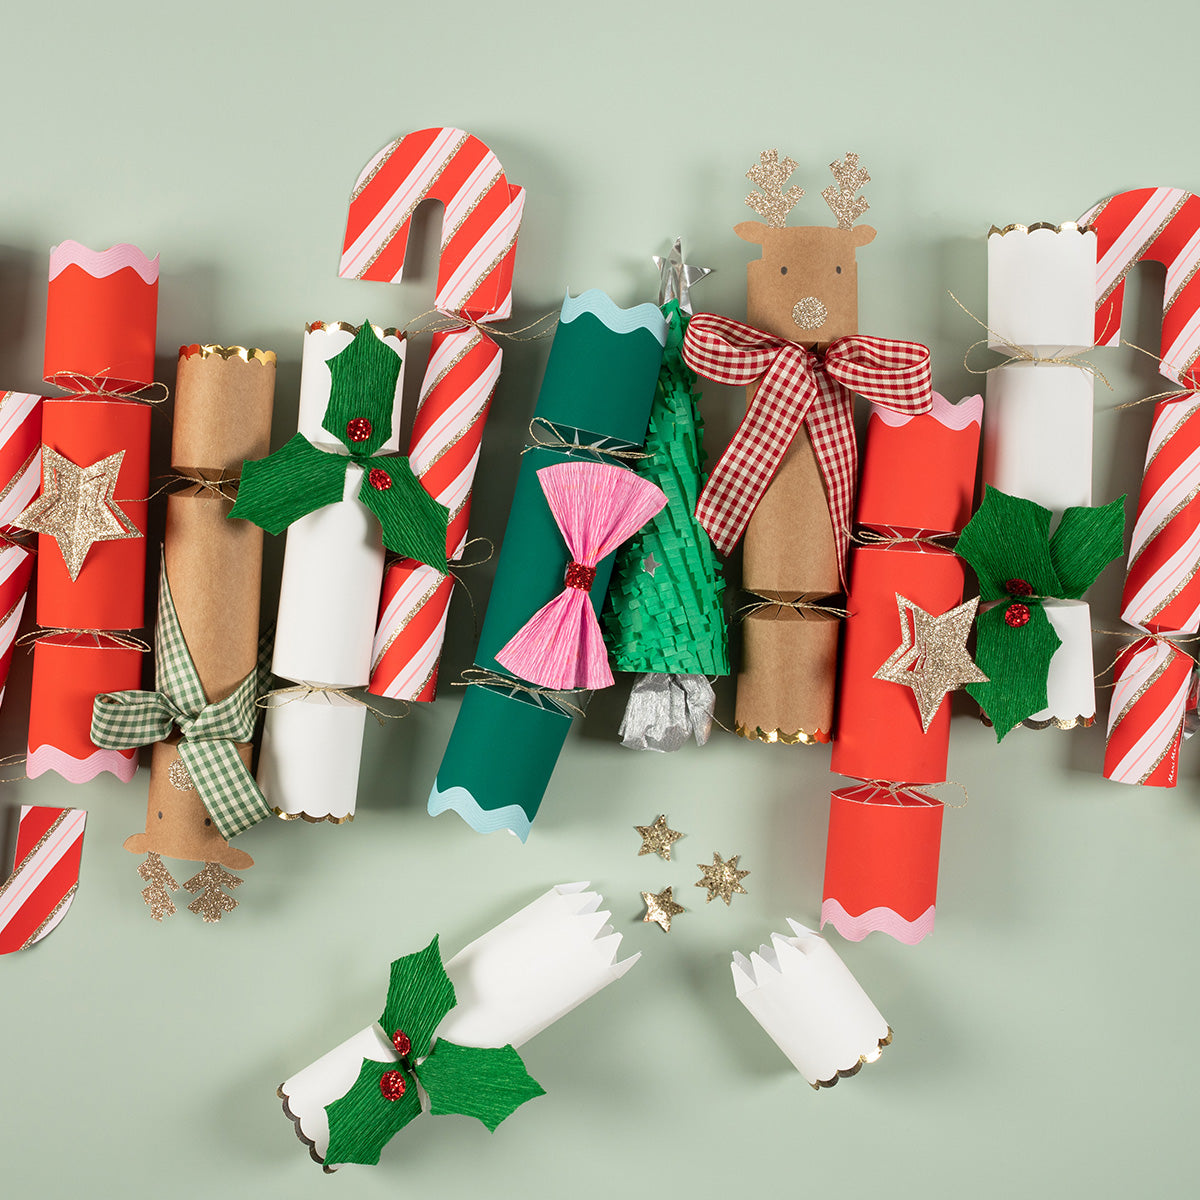 Our fun Christmas crackers, designed as candy cane decorations, make wonderful Christmas crackers for kids.